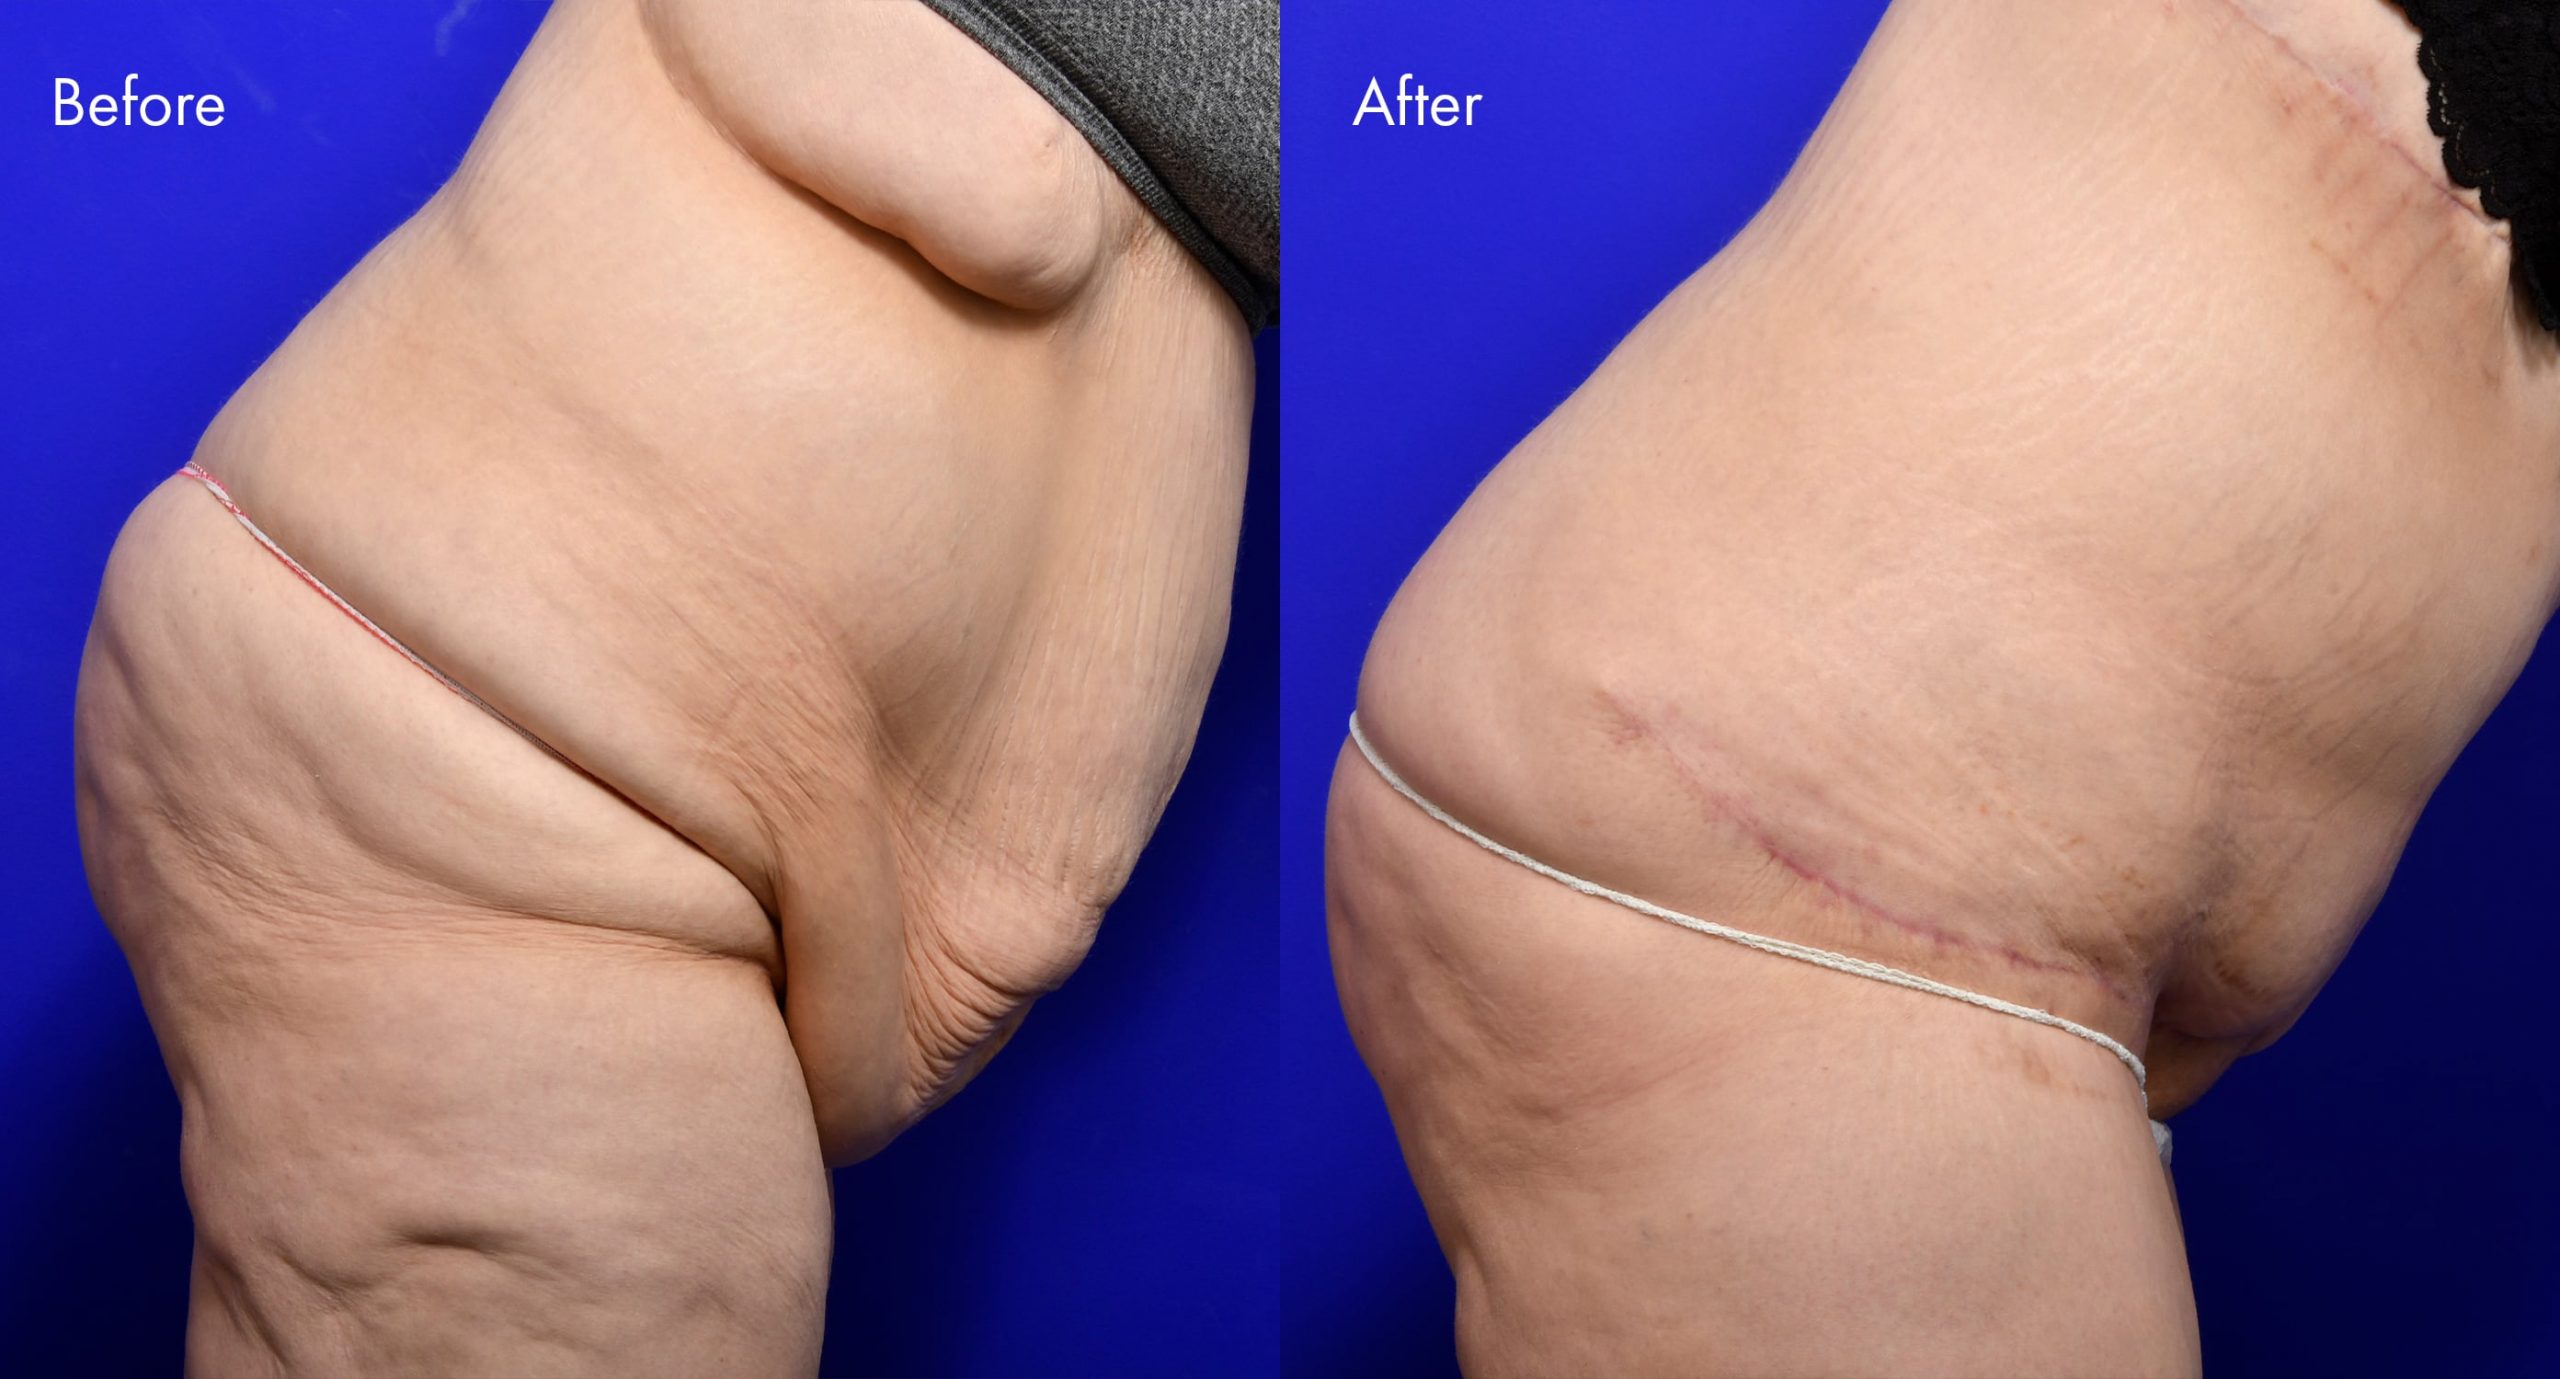 Tummy Tuck (Abdominoplasty) Before and After | 6